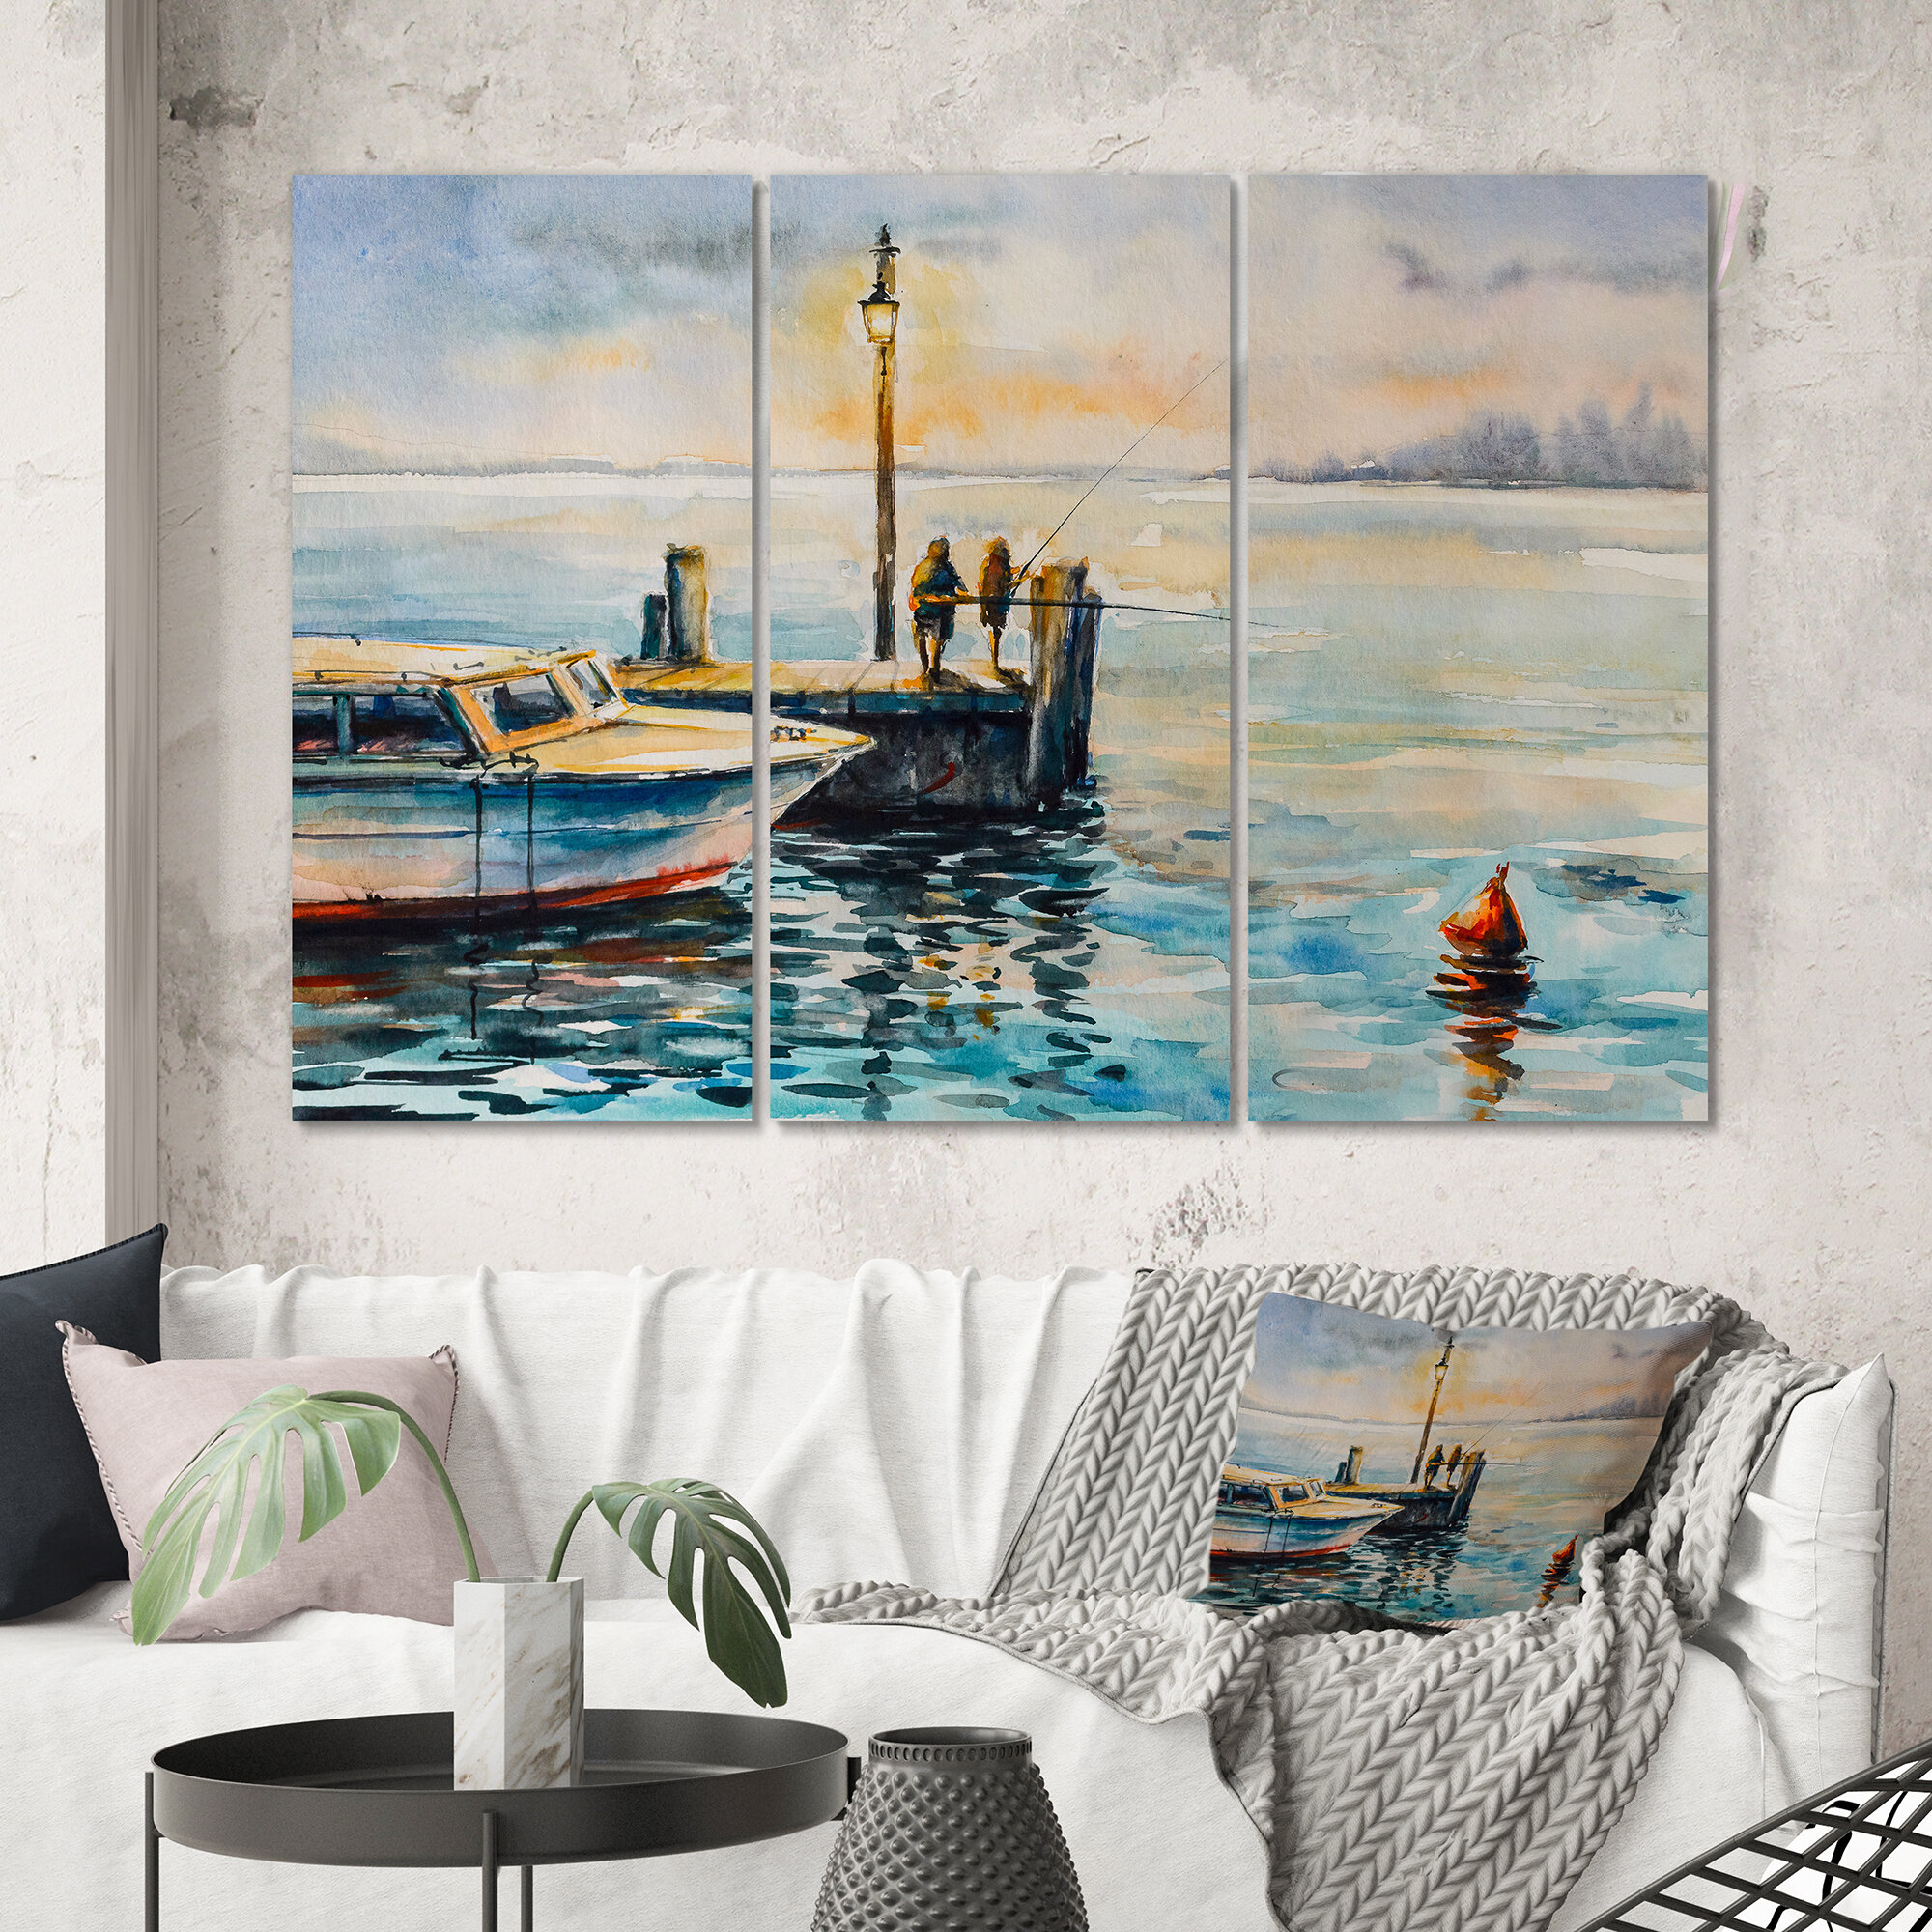 Two Men Fishing at Dusk at The Pier - Nautical & Coastal Canvas Wall Art Print East Urban Home Size: 40 H x 60 W x 1 D